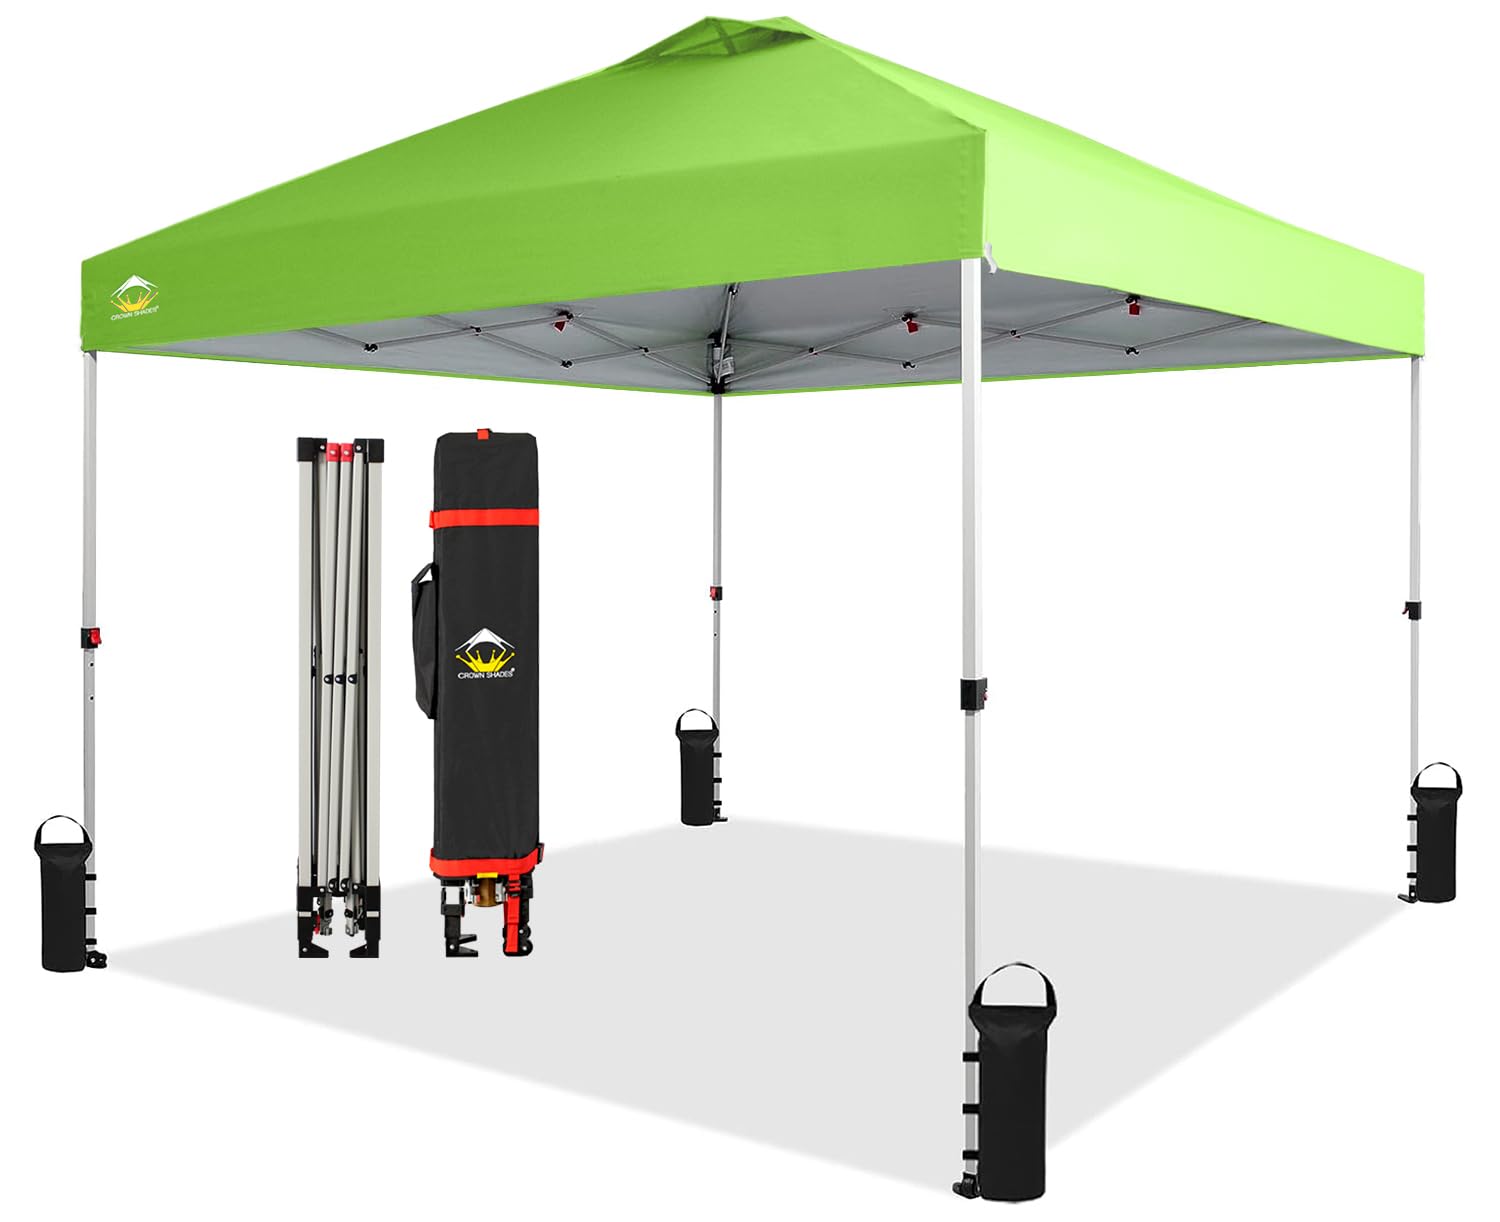 CROWN SHADES 10x10 Pop Up Canopy, Patented Center Lock One Push Instant Popup Outdoor Canopy Tent, Newly Designed Storage Bag, 8